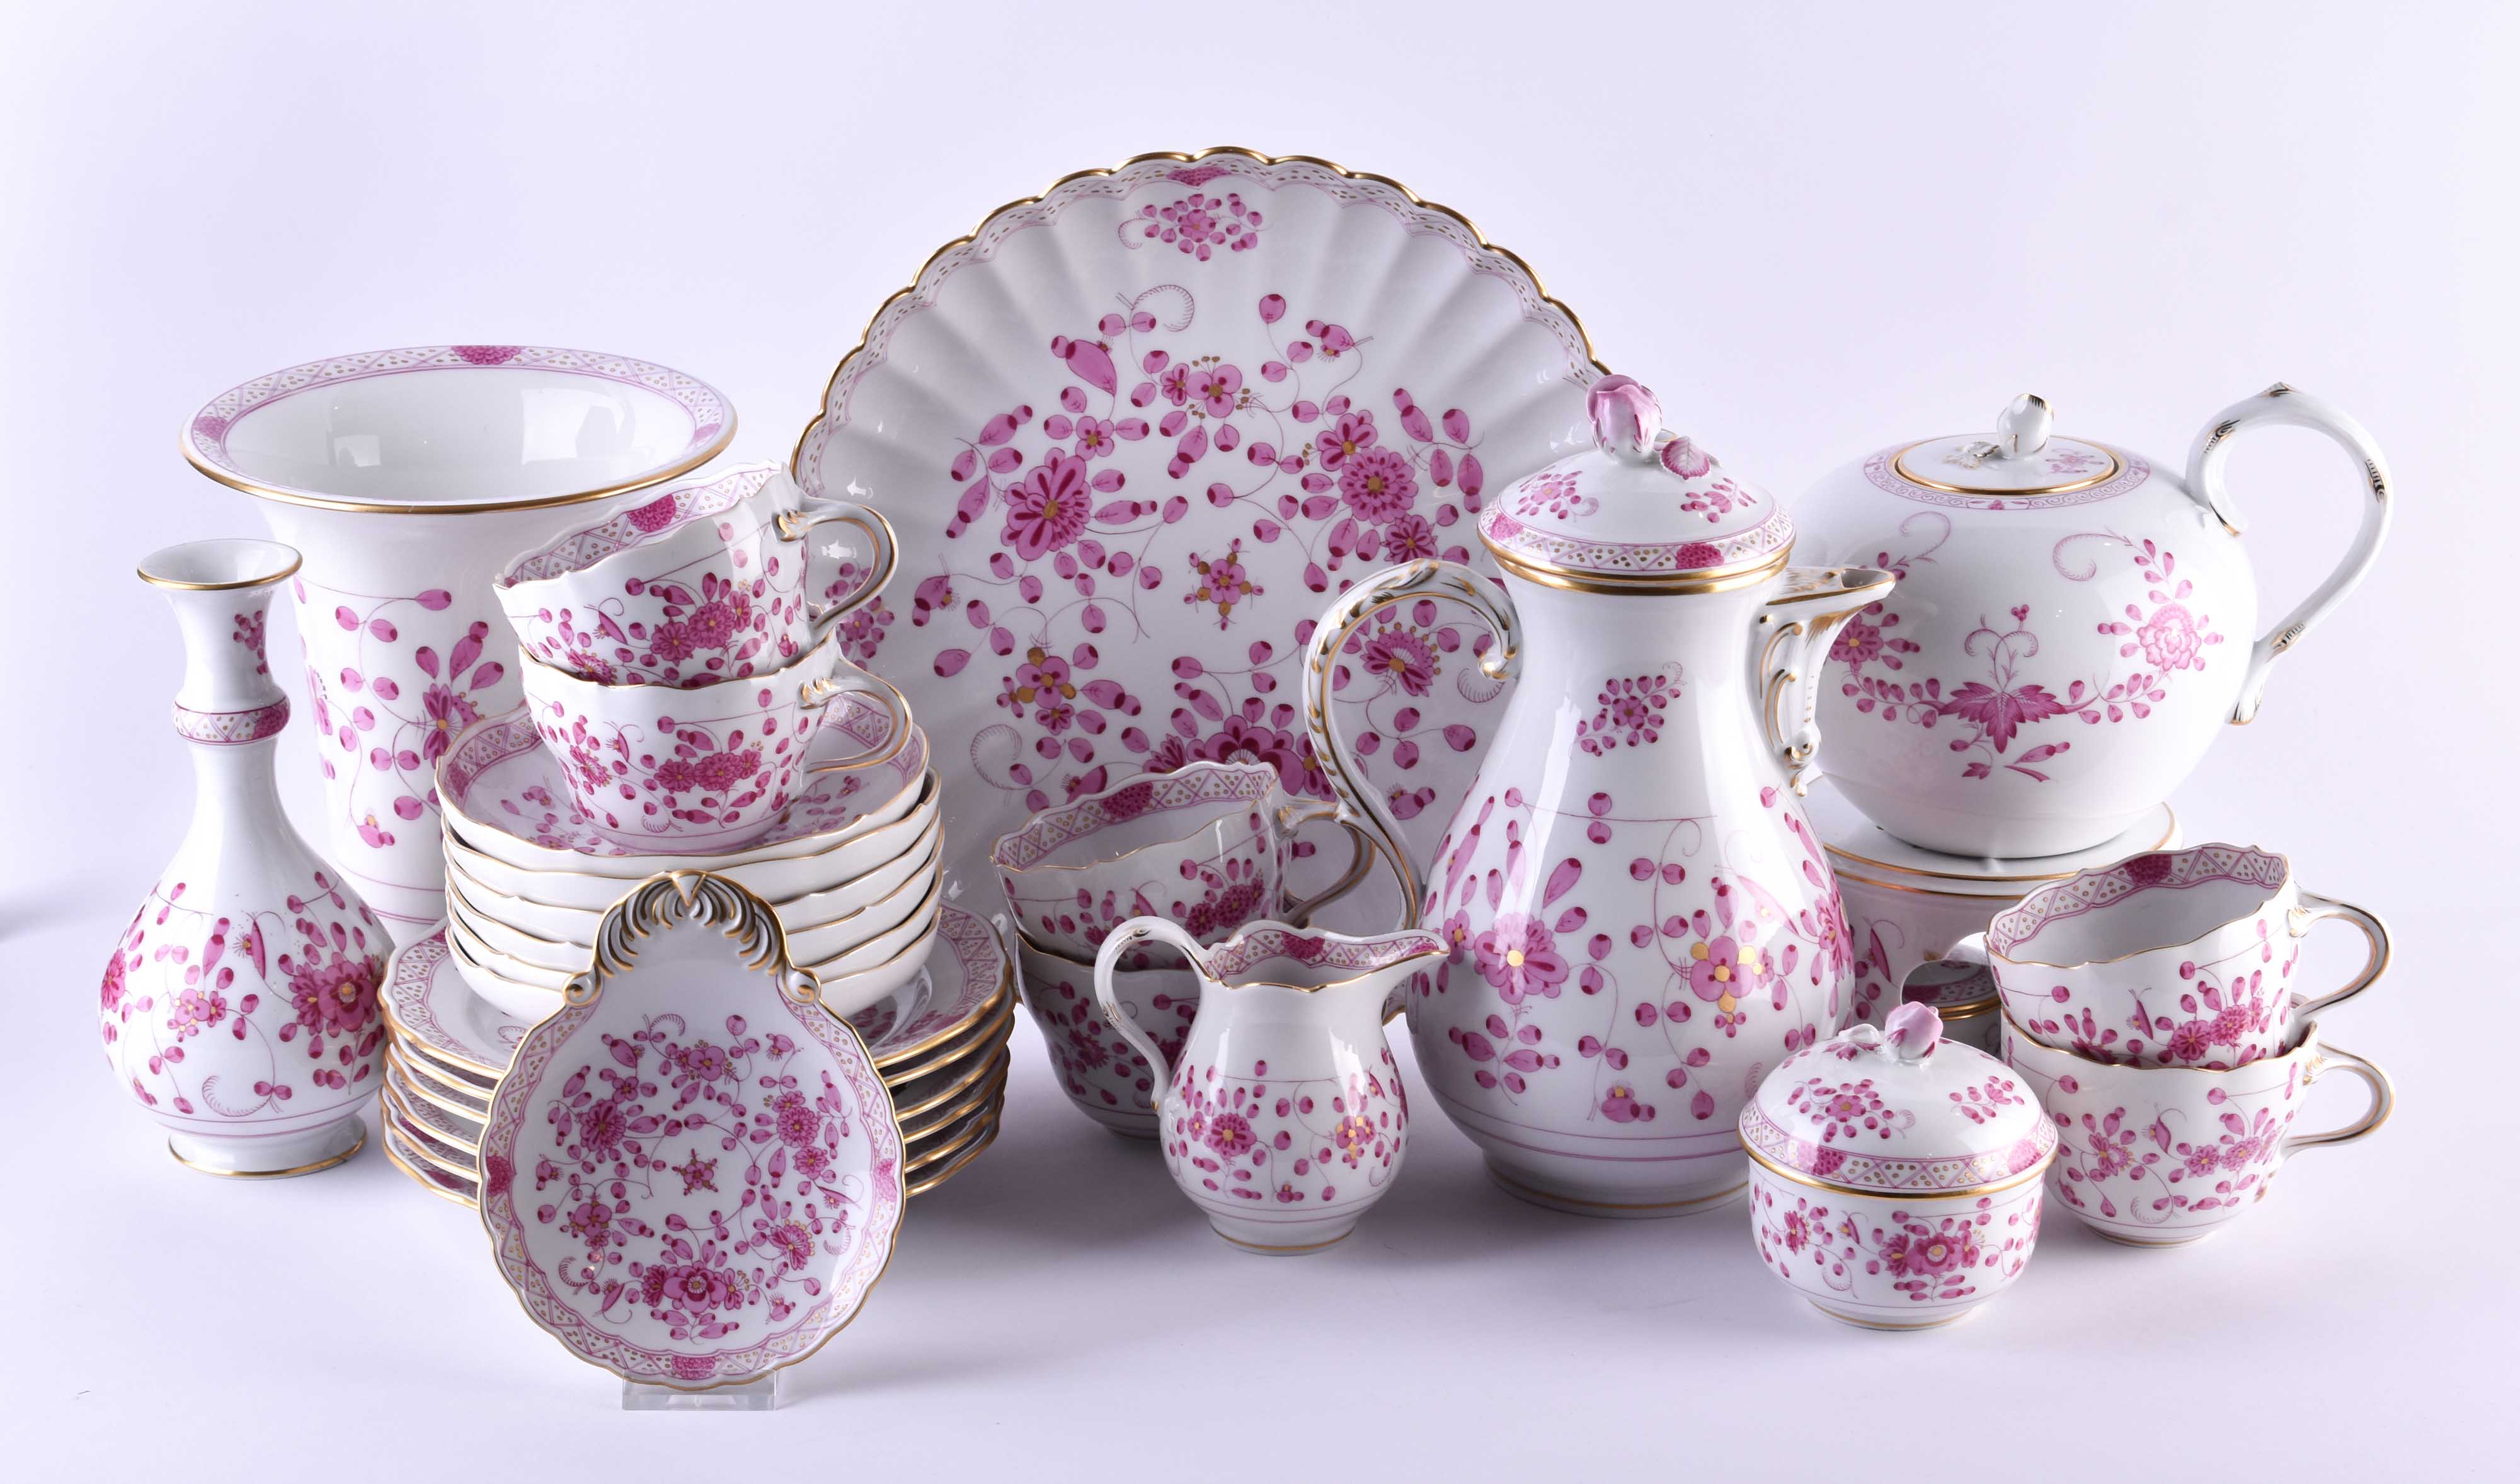 Coffee/tea service for 6 persons Meissen - Image 2 of 6